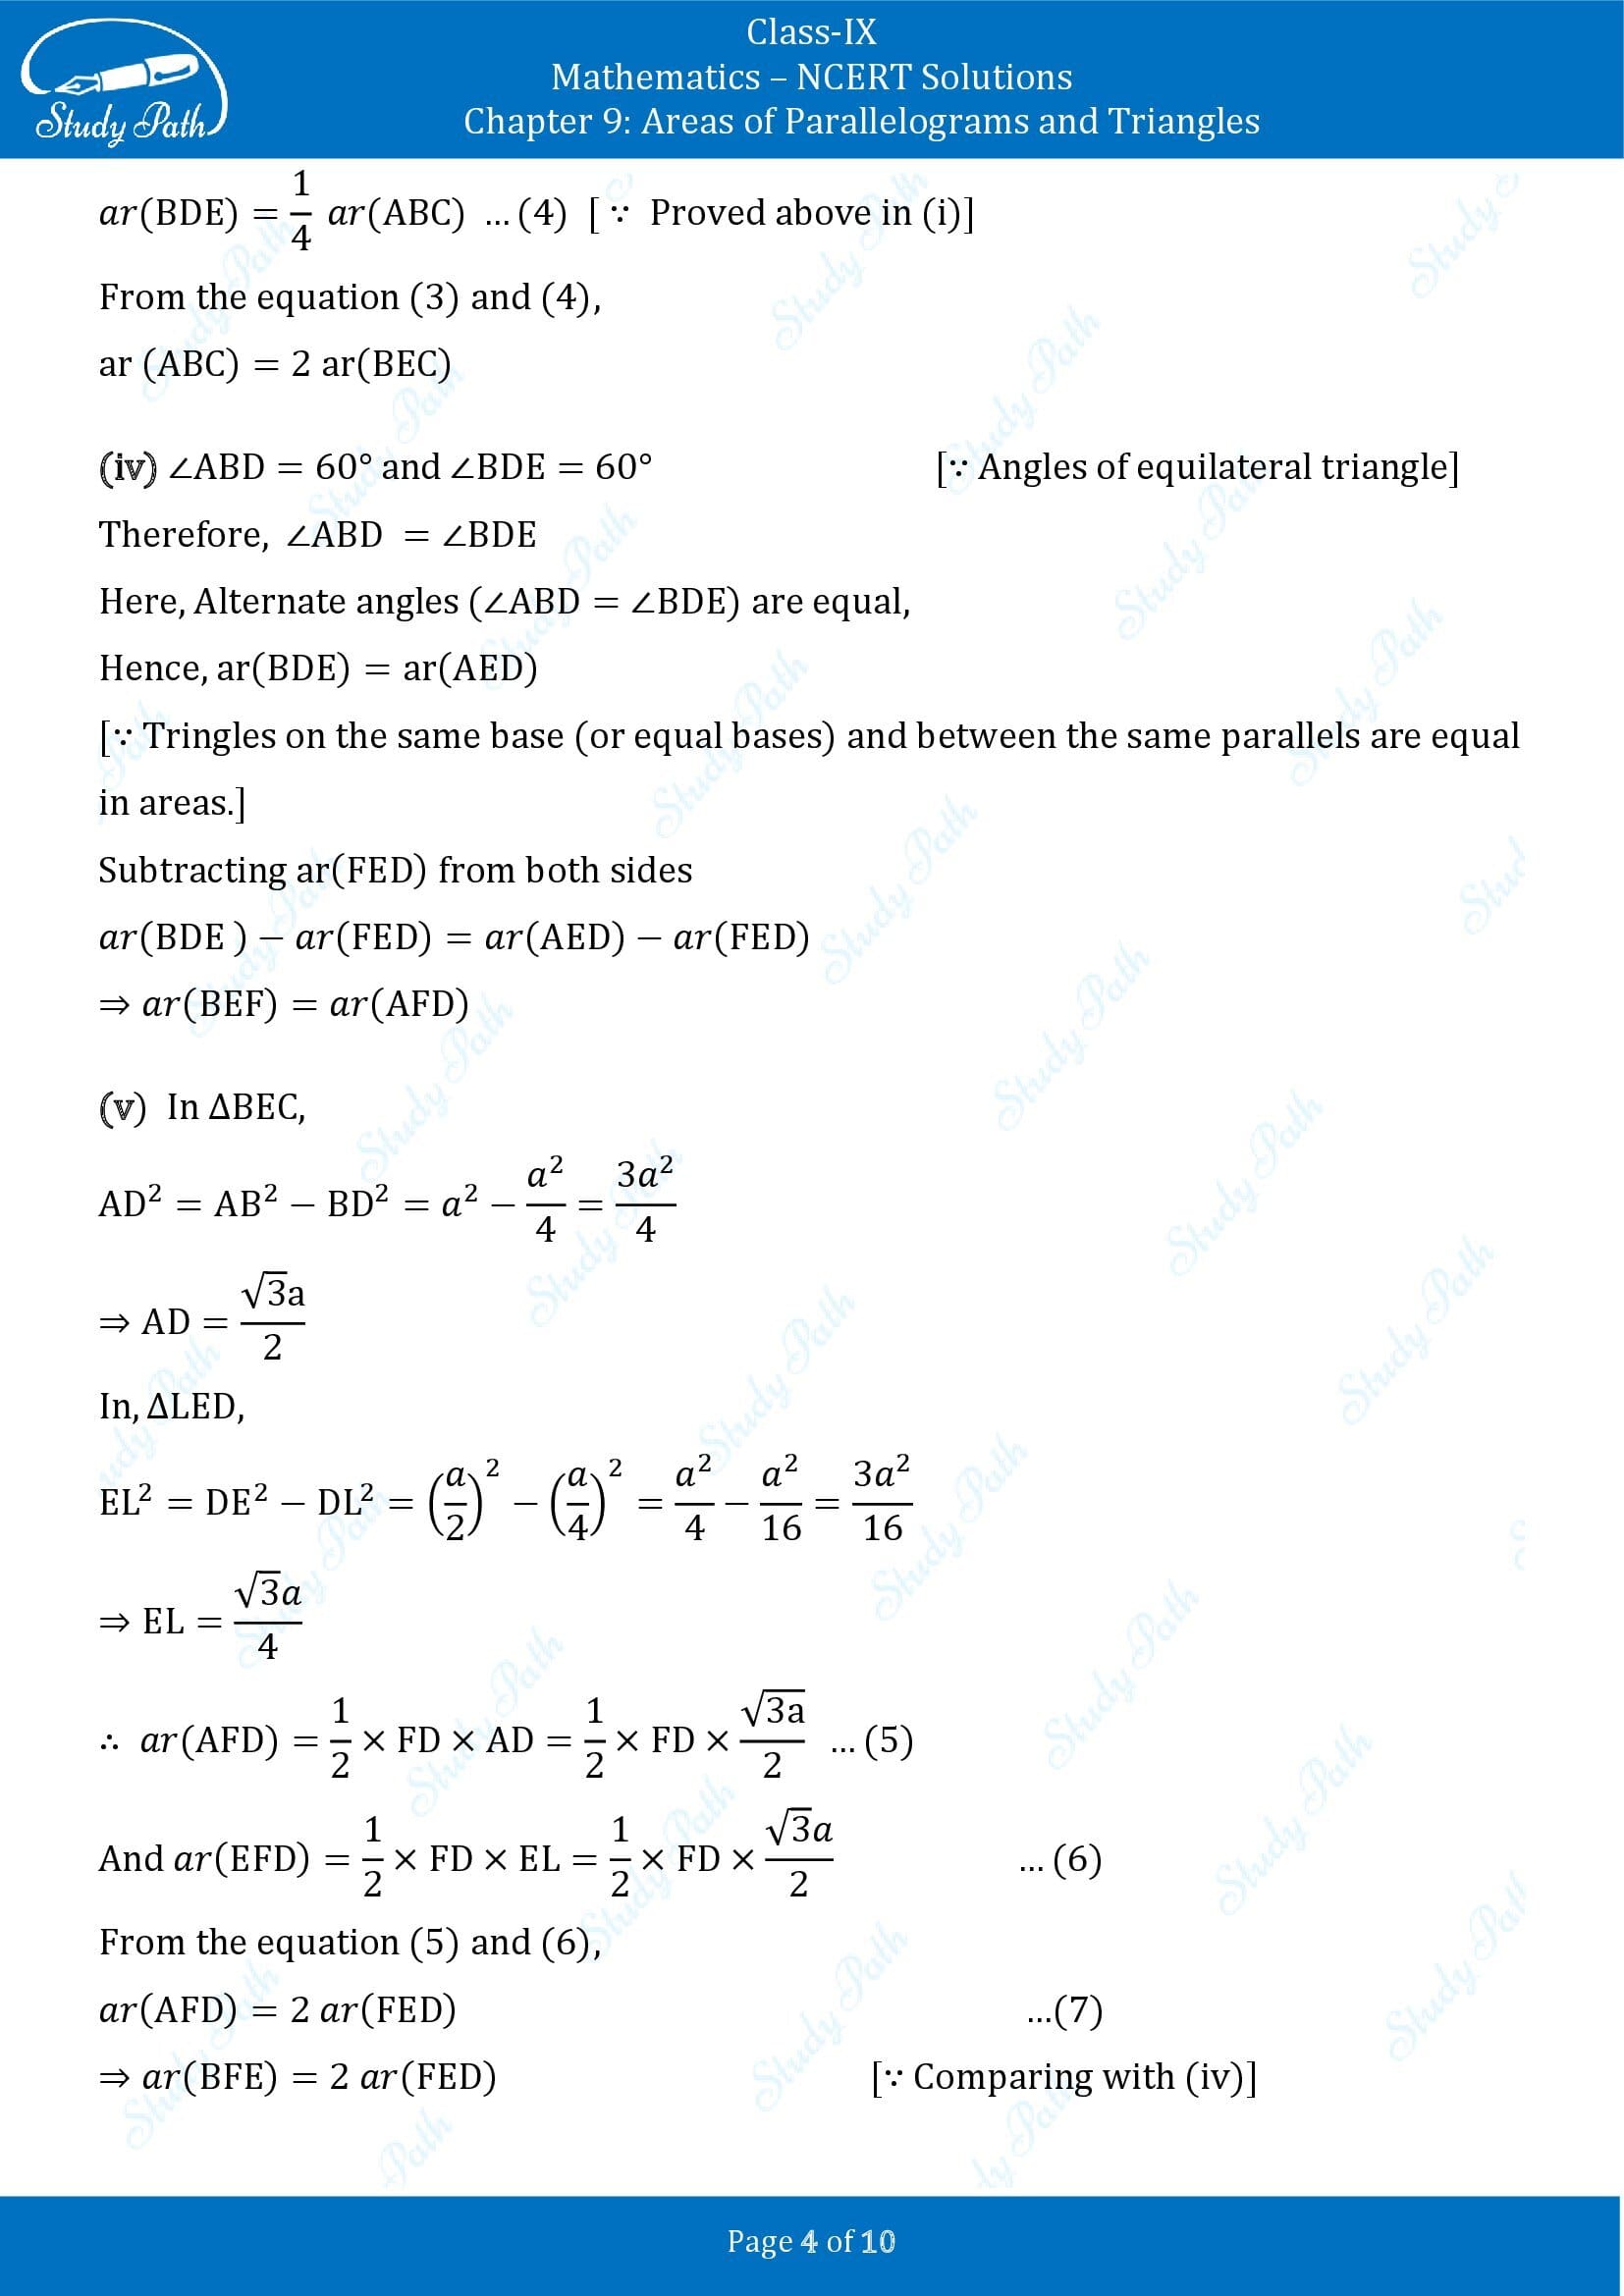 NCERT Solutions for Class 9 Maths Chapter 9 Areas of Parallelograms and Triangles Exercise 9.4 00004